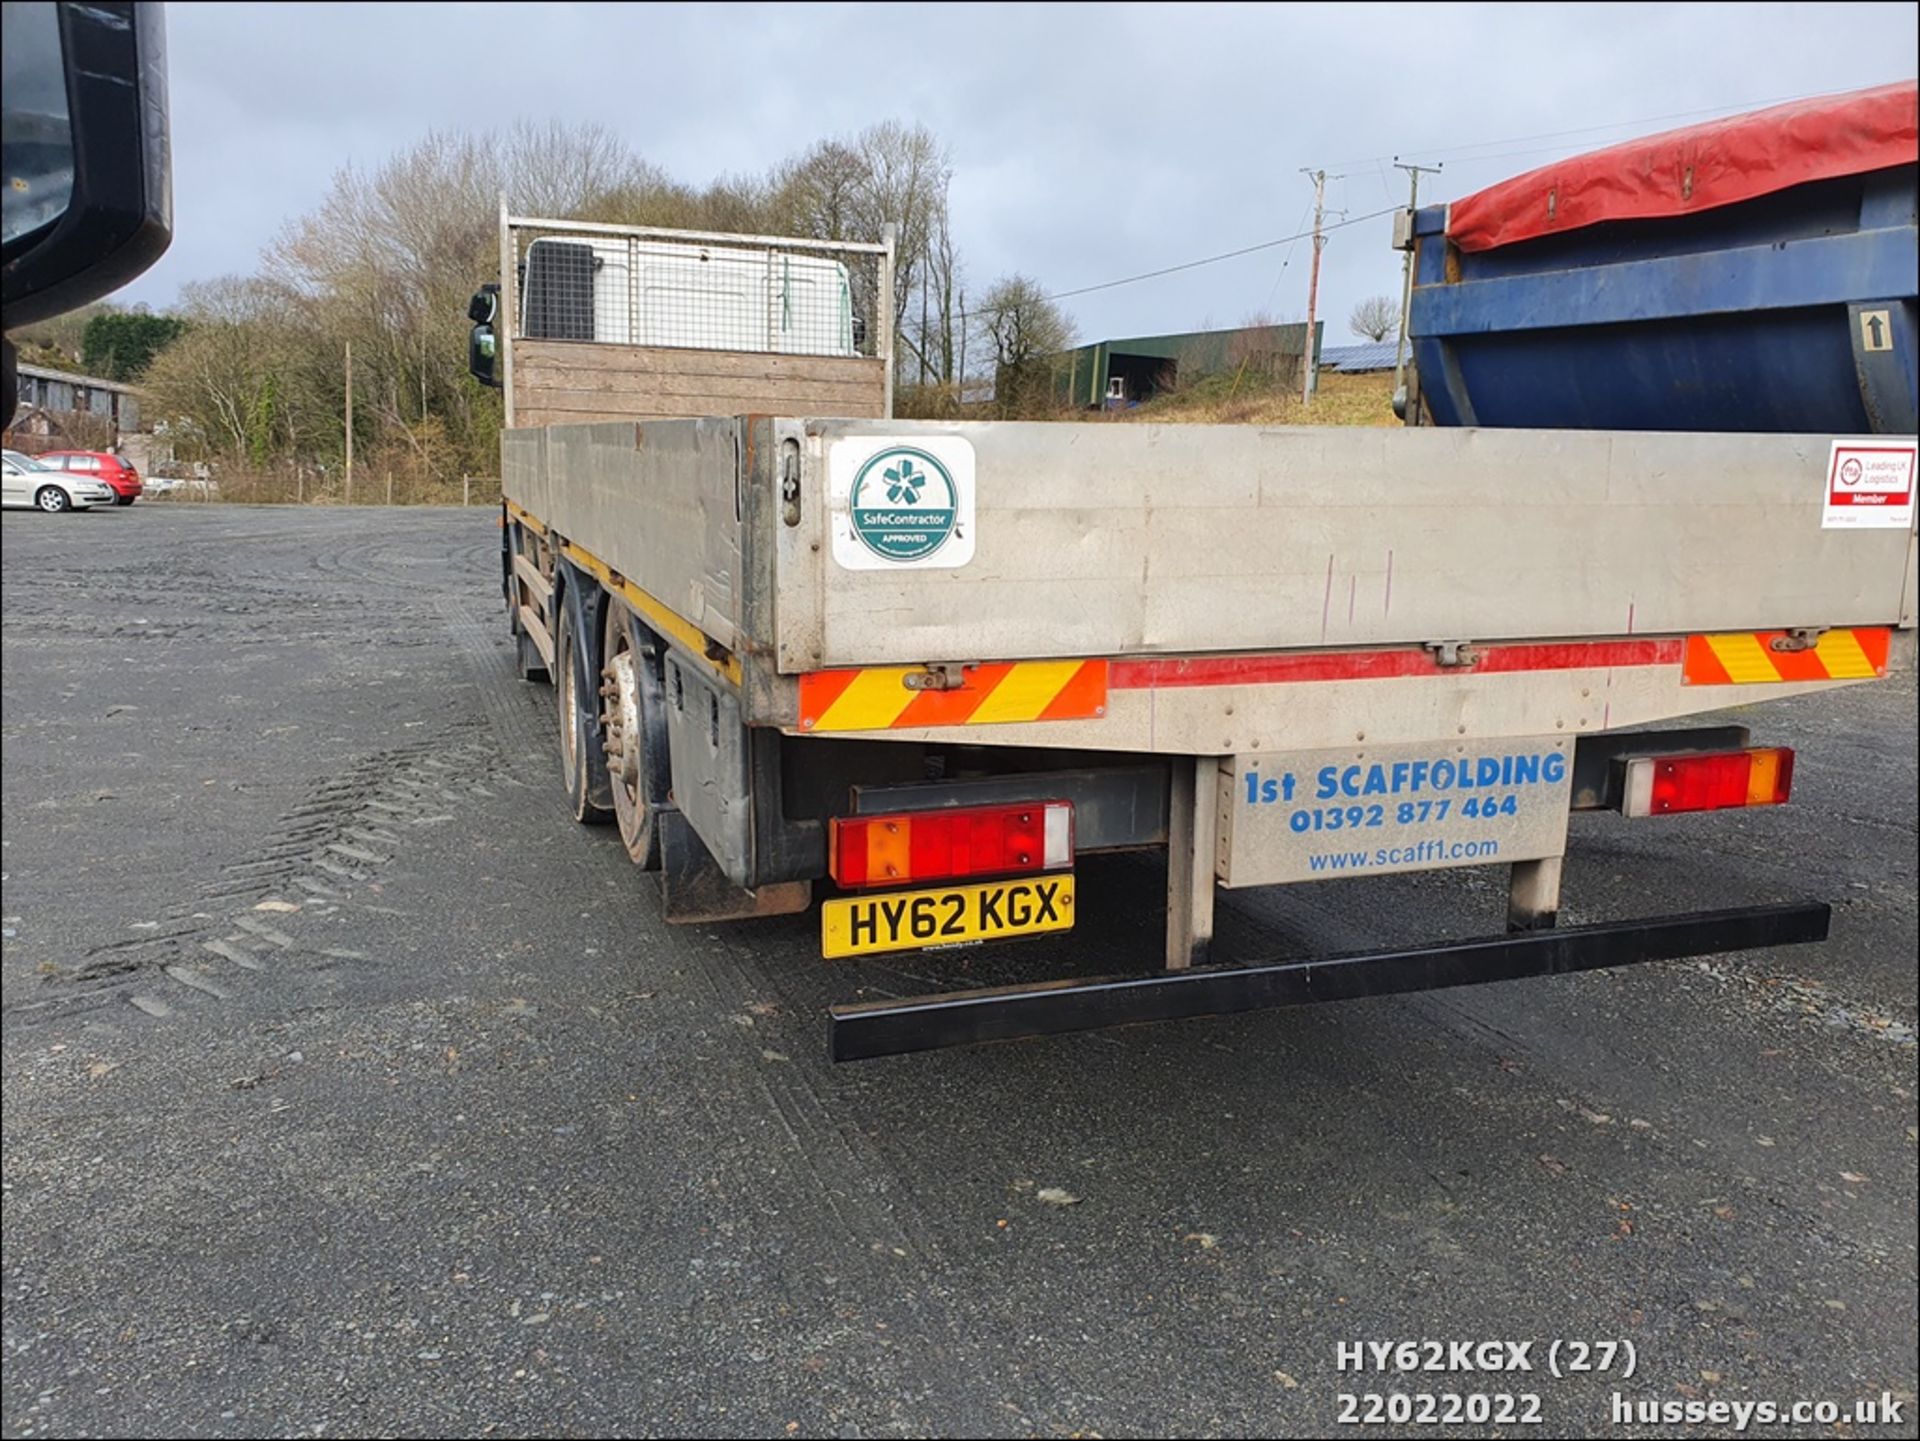 12/62 IVECO STRALIS - 7790cc 2dr Flat Bed (White) - Image 27 of 28